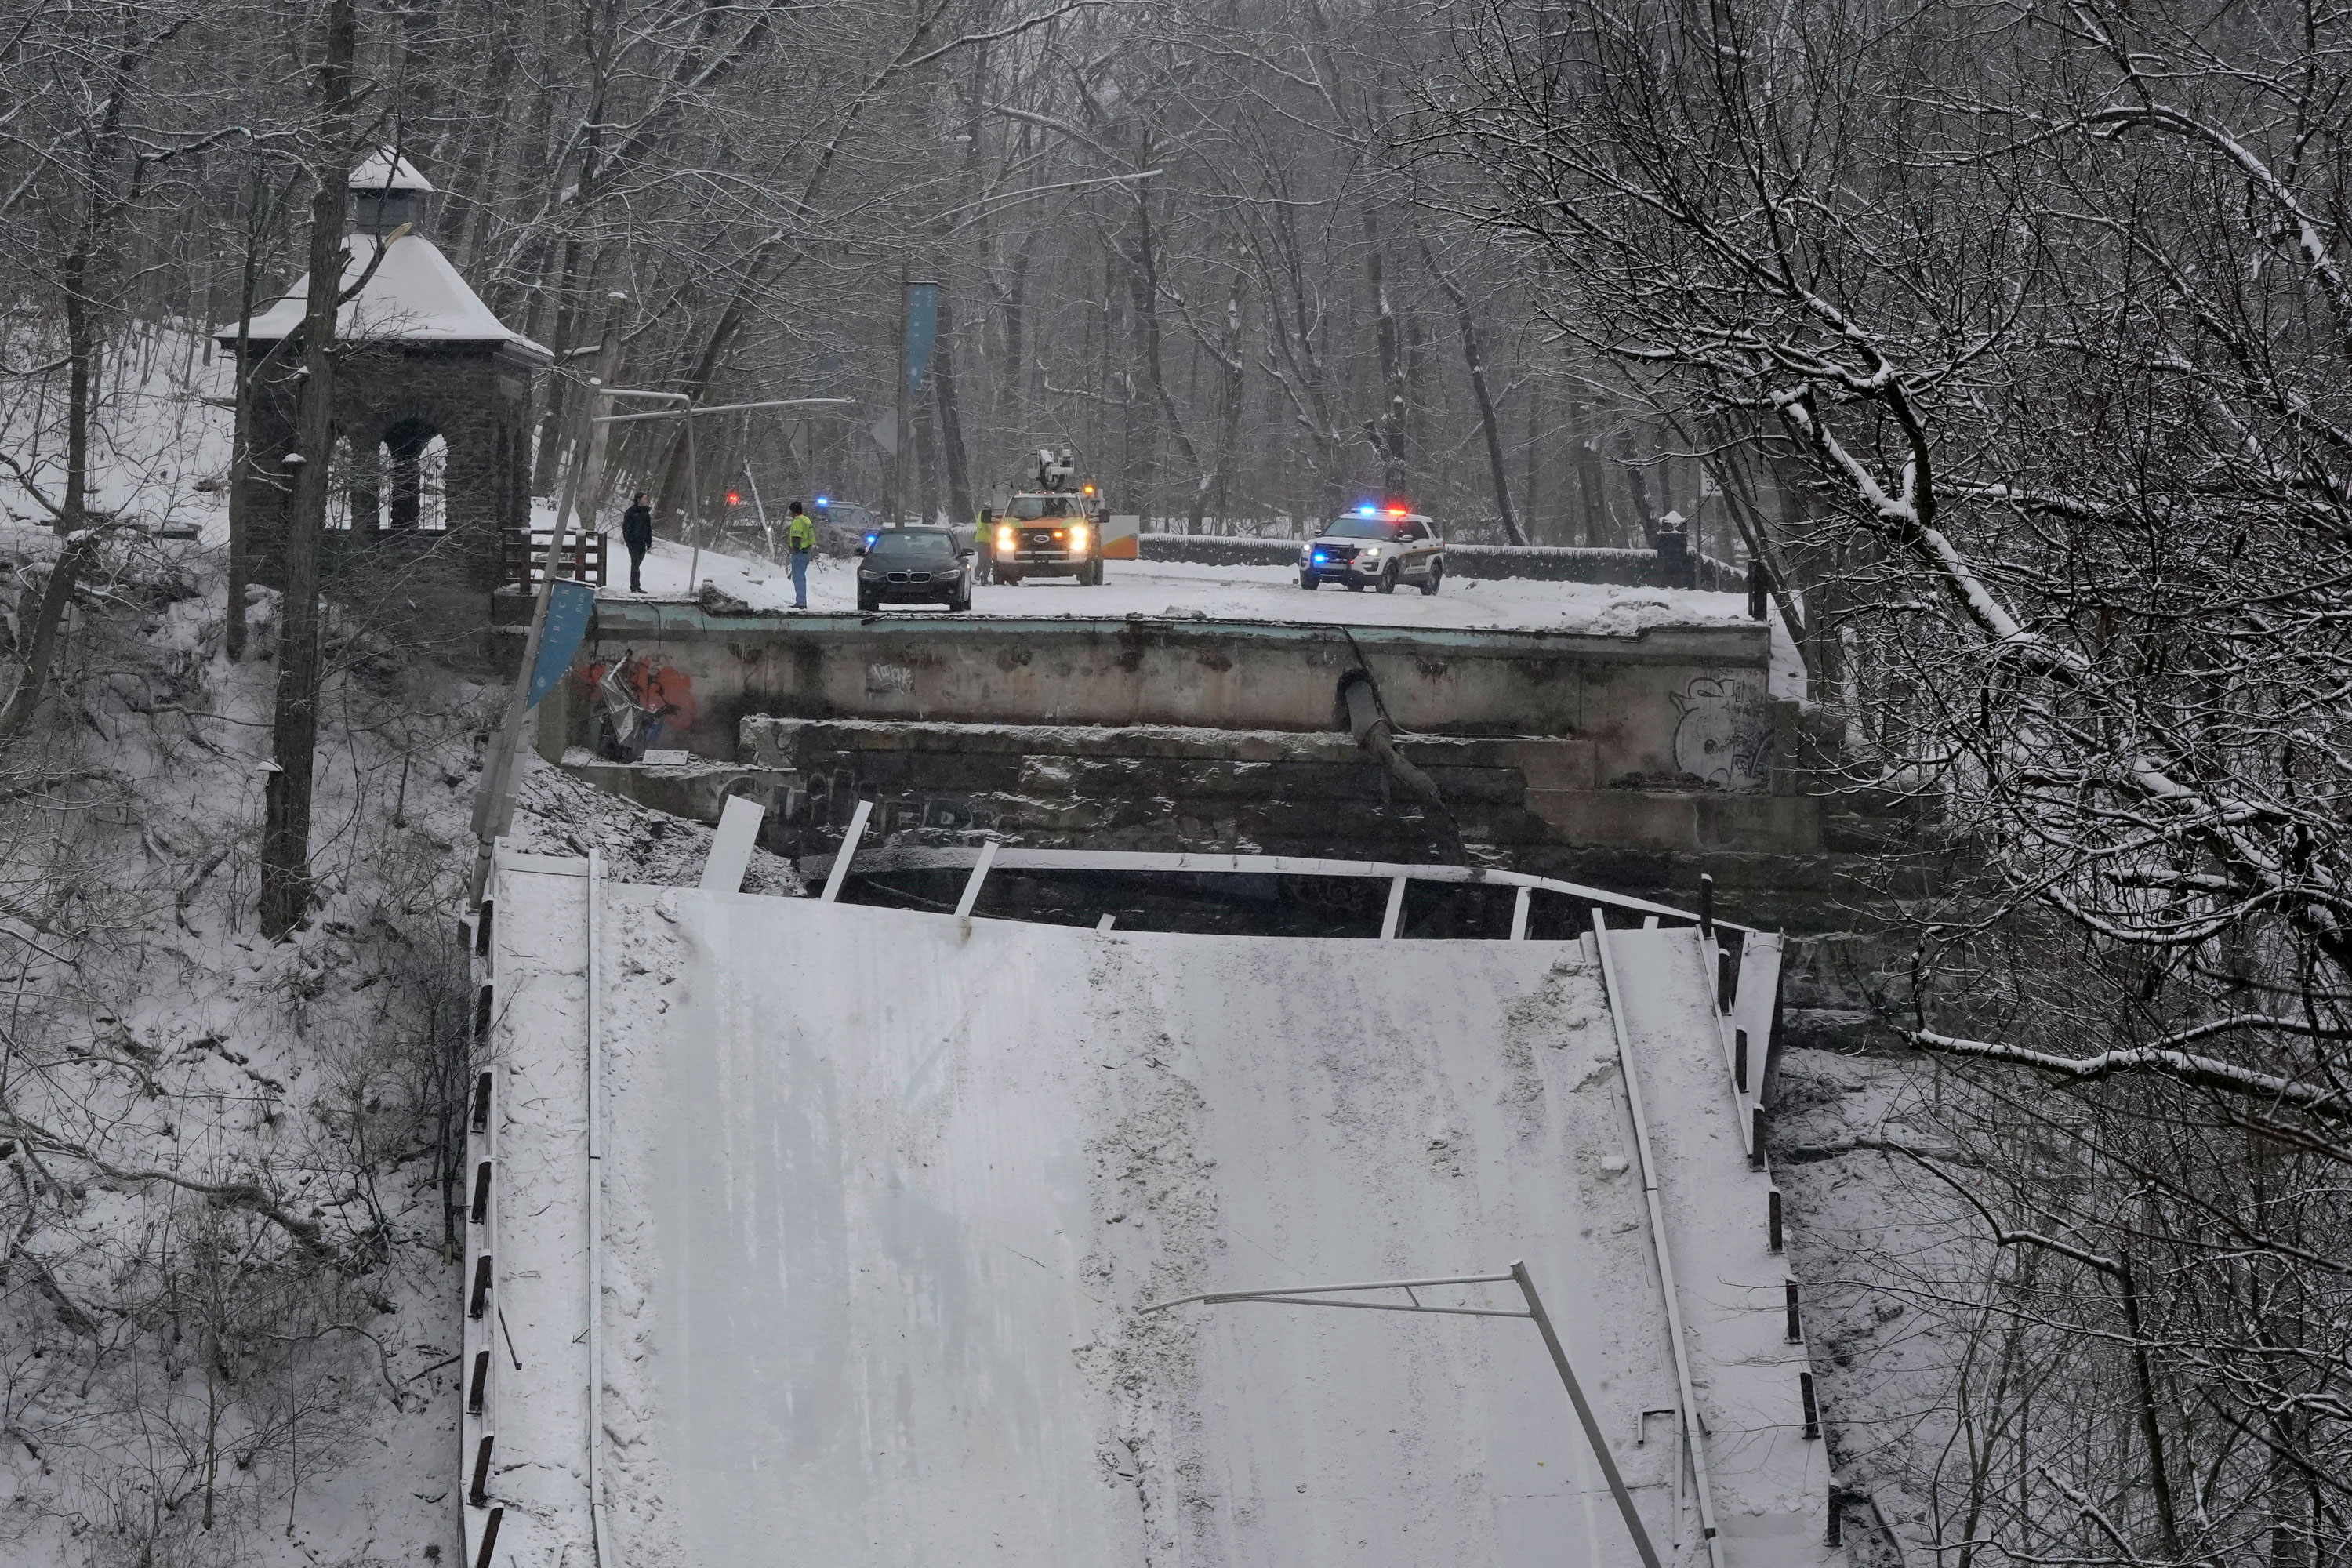 Emergency personnel are seen at the edge of the bridge that collapsed in Pittsburgh on Friday.